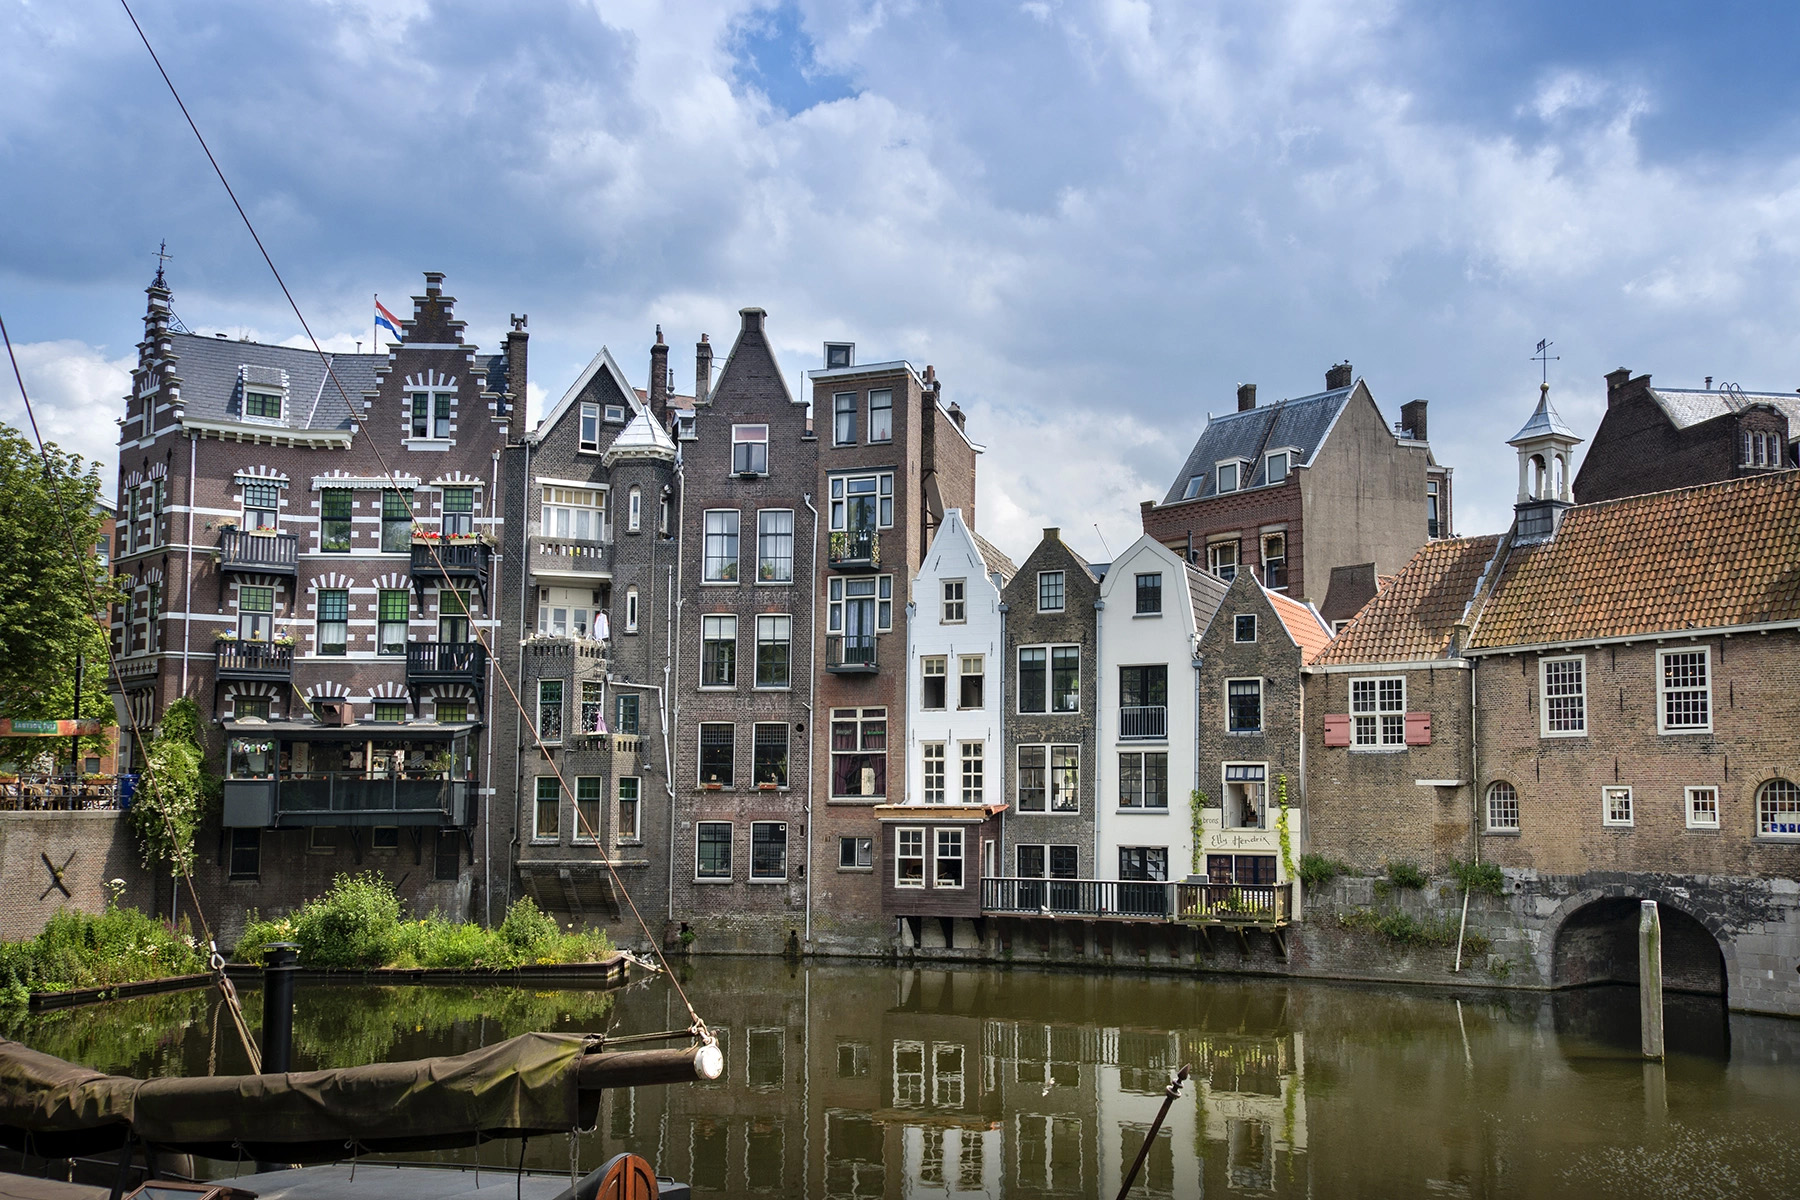 The historical houses of Delfshaven in Rotterdam